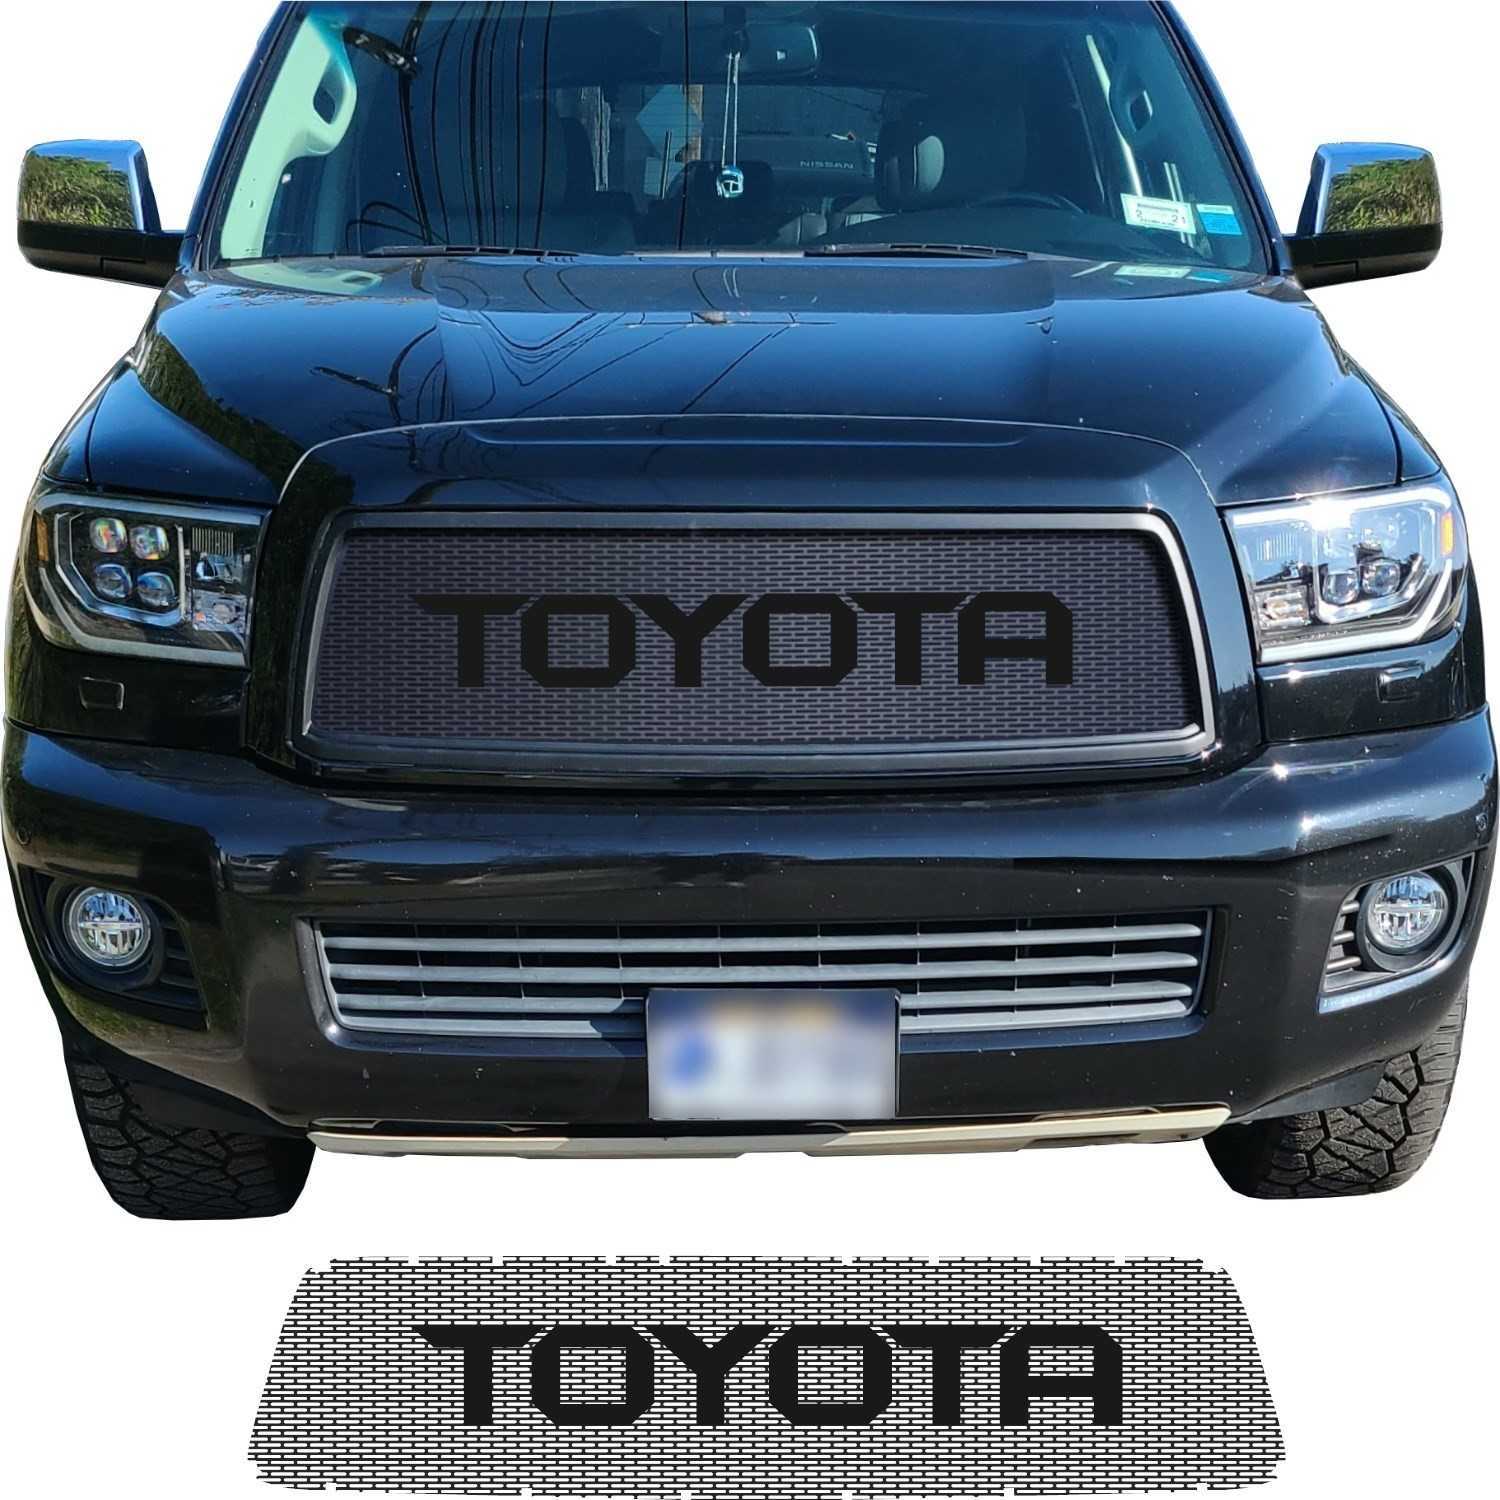 2008 - 2017 Toyota Sequoia Grill Mesh with Big Letters